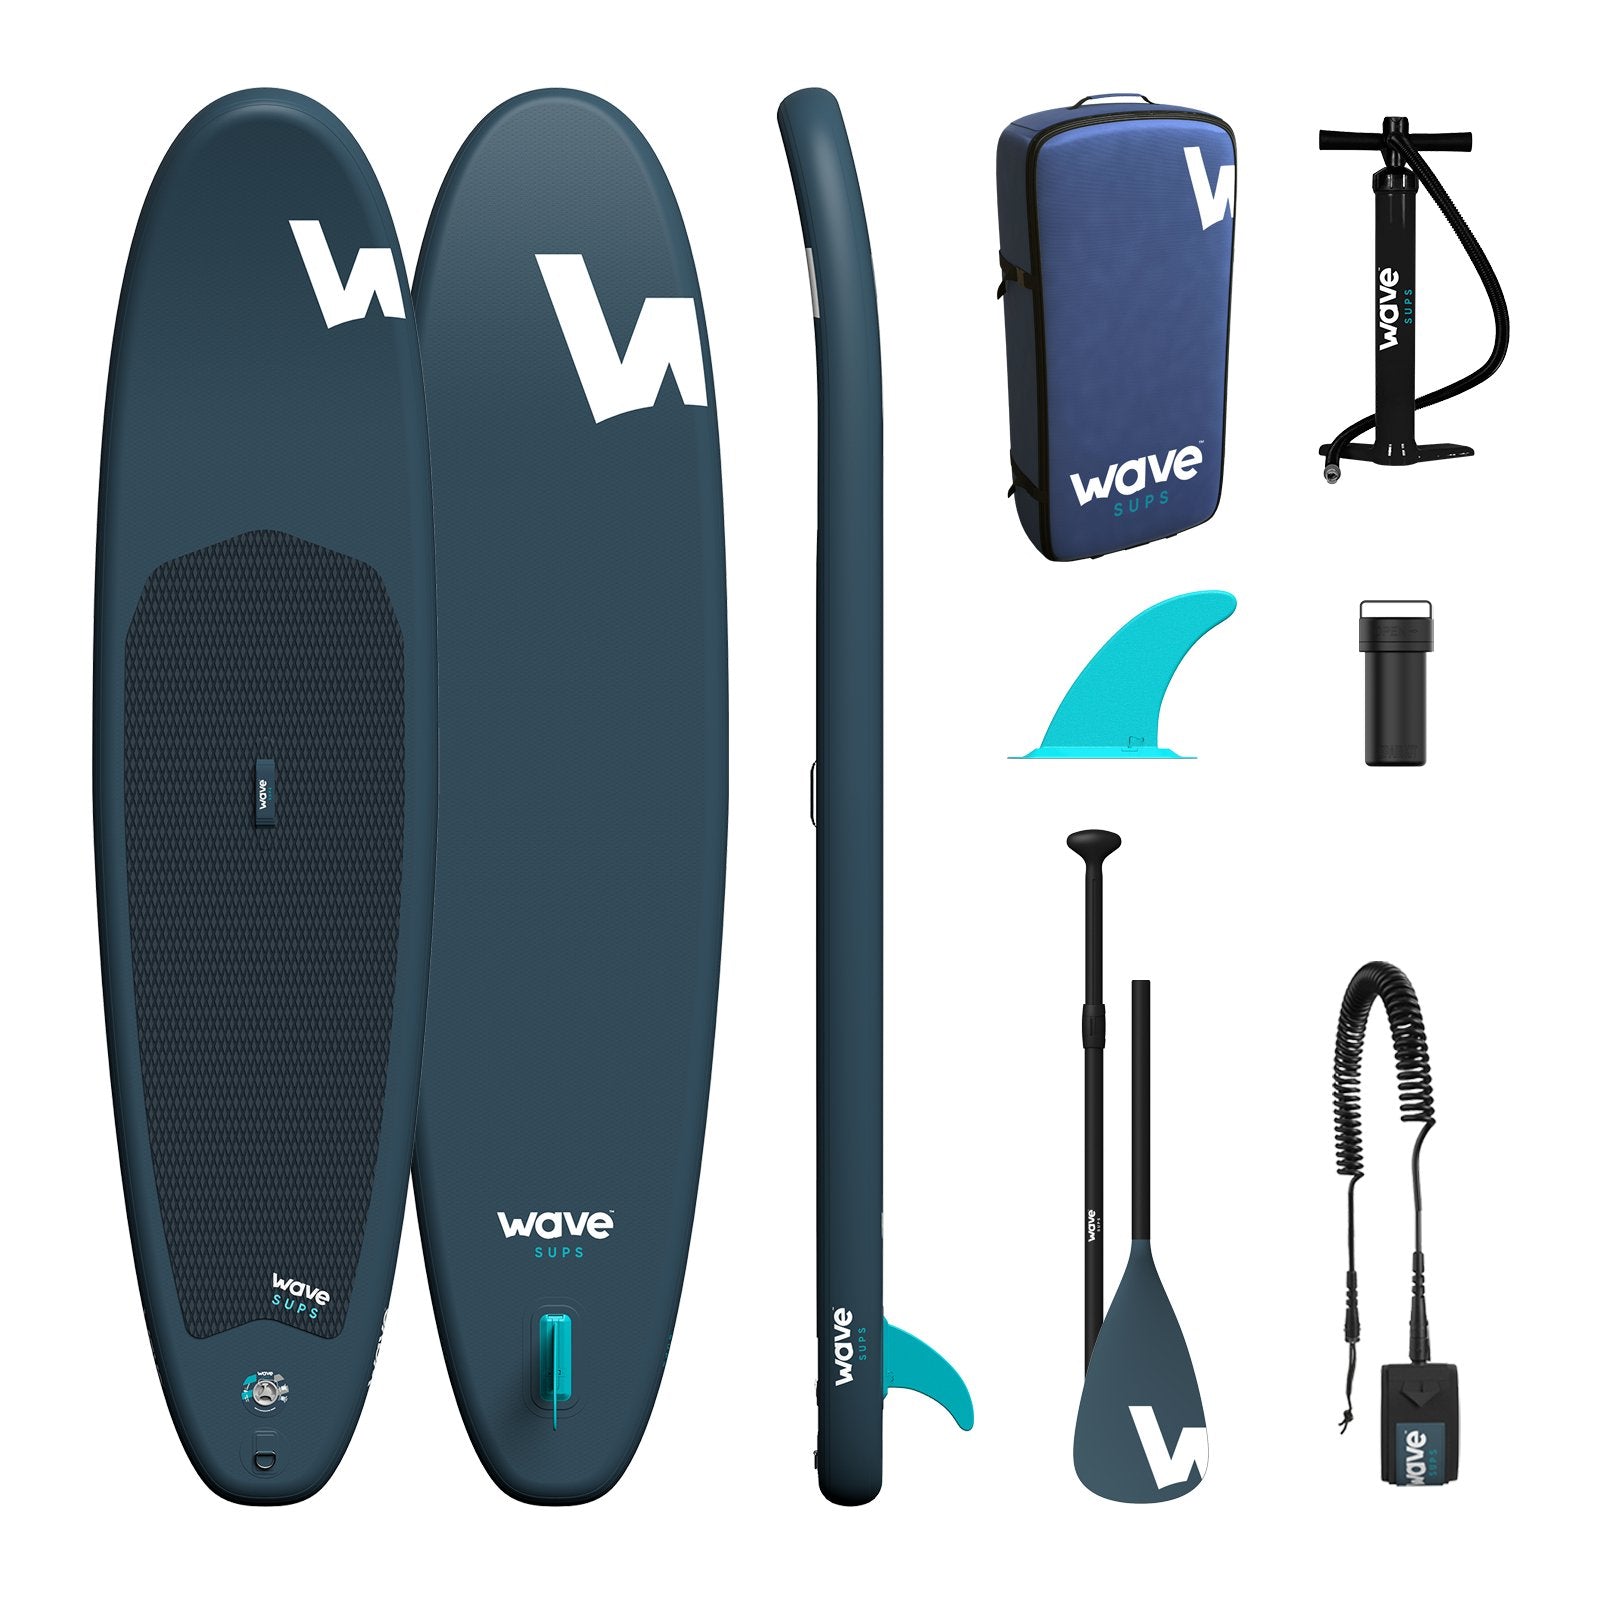 Cruiser SUP | Inflatable Stand-Up Paddleboard | 10/11 ft | Navy - Wave Sups EU